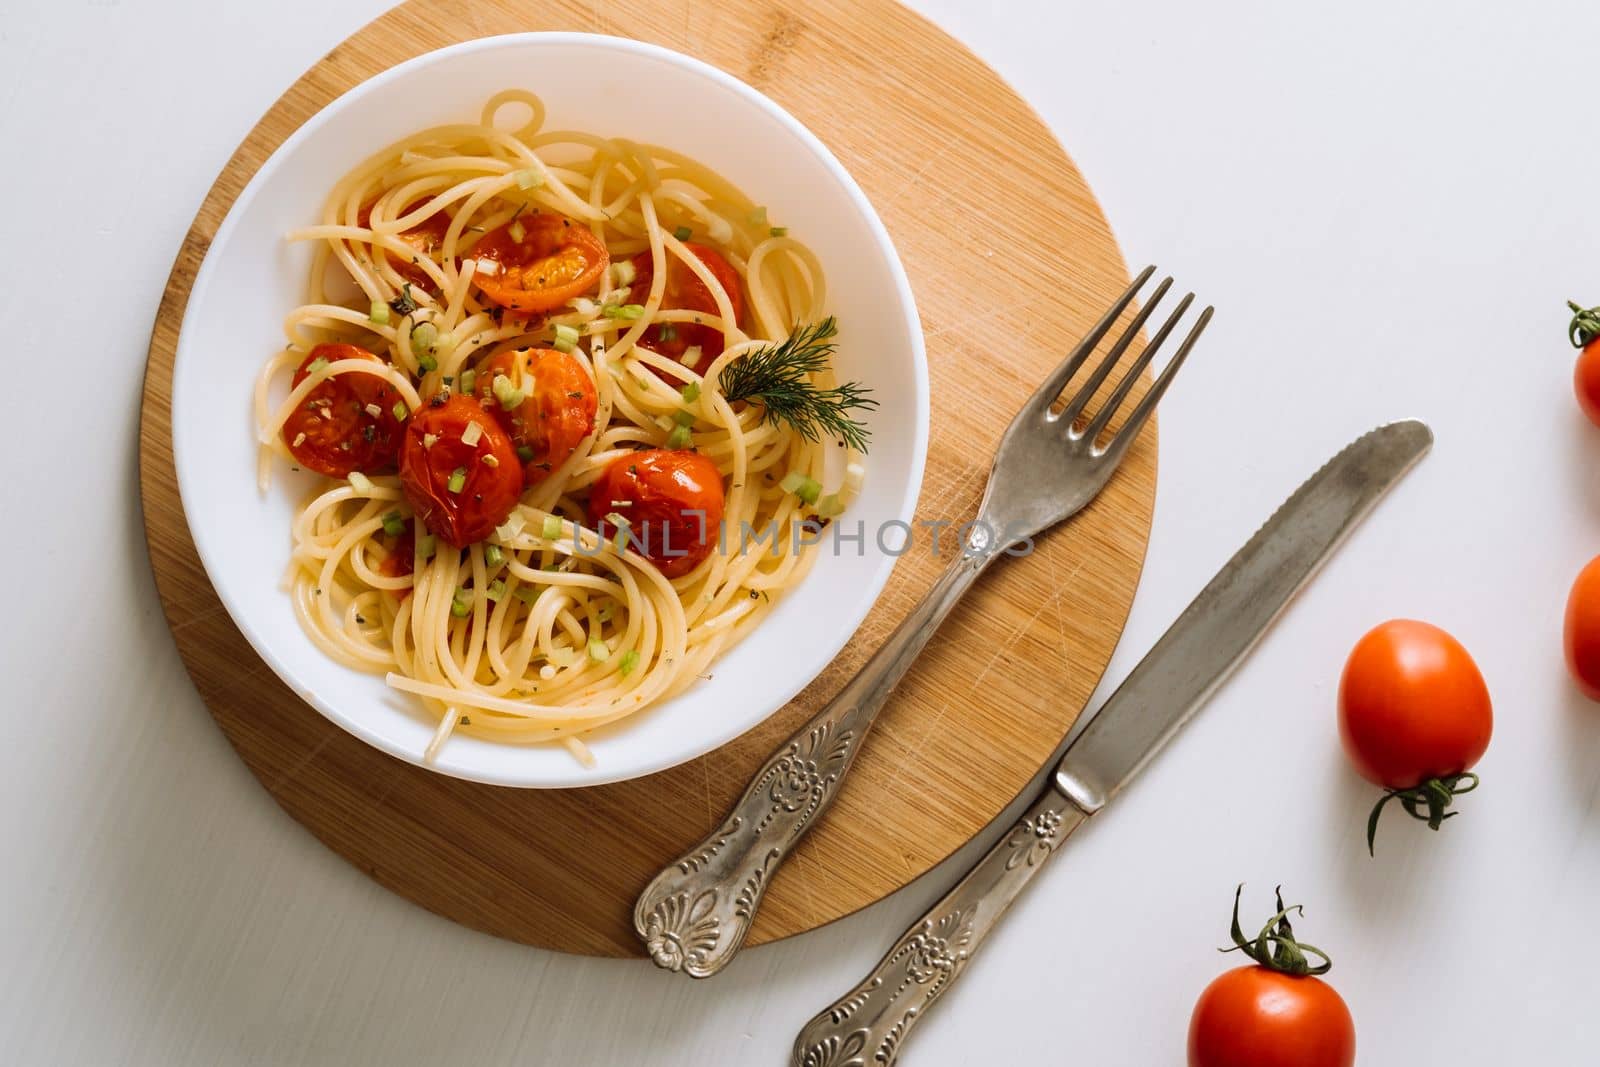 Flat lay portion of spaghetti pasta with cherry tomatoes sprinkled with spices in a plate on a wooden board by Romvy